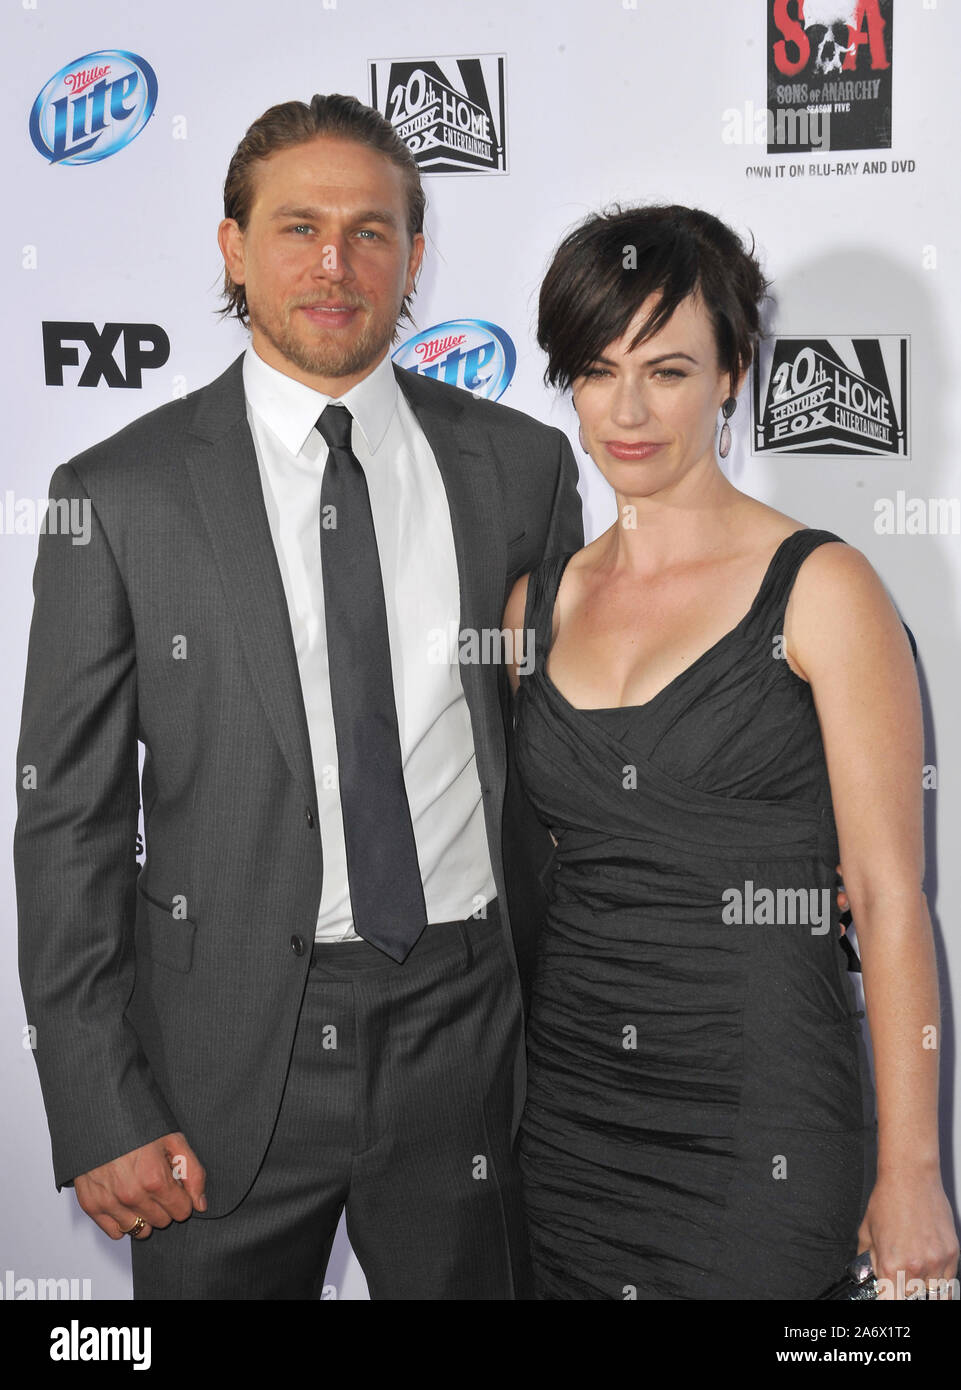 LOS ANGELES, CA. September 07, 2013: Charlie Hunnam & Maggie Siff at the season 6 premiere of 'Sons of Anarchy' at the Dolby Theatre, Hollywood. © 2013 Paul Smith / Featureflash Stock Photo